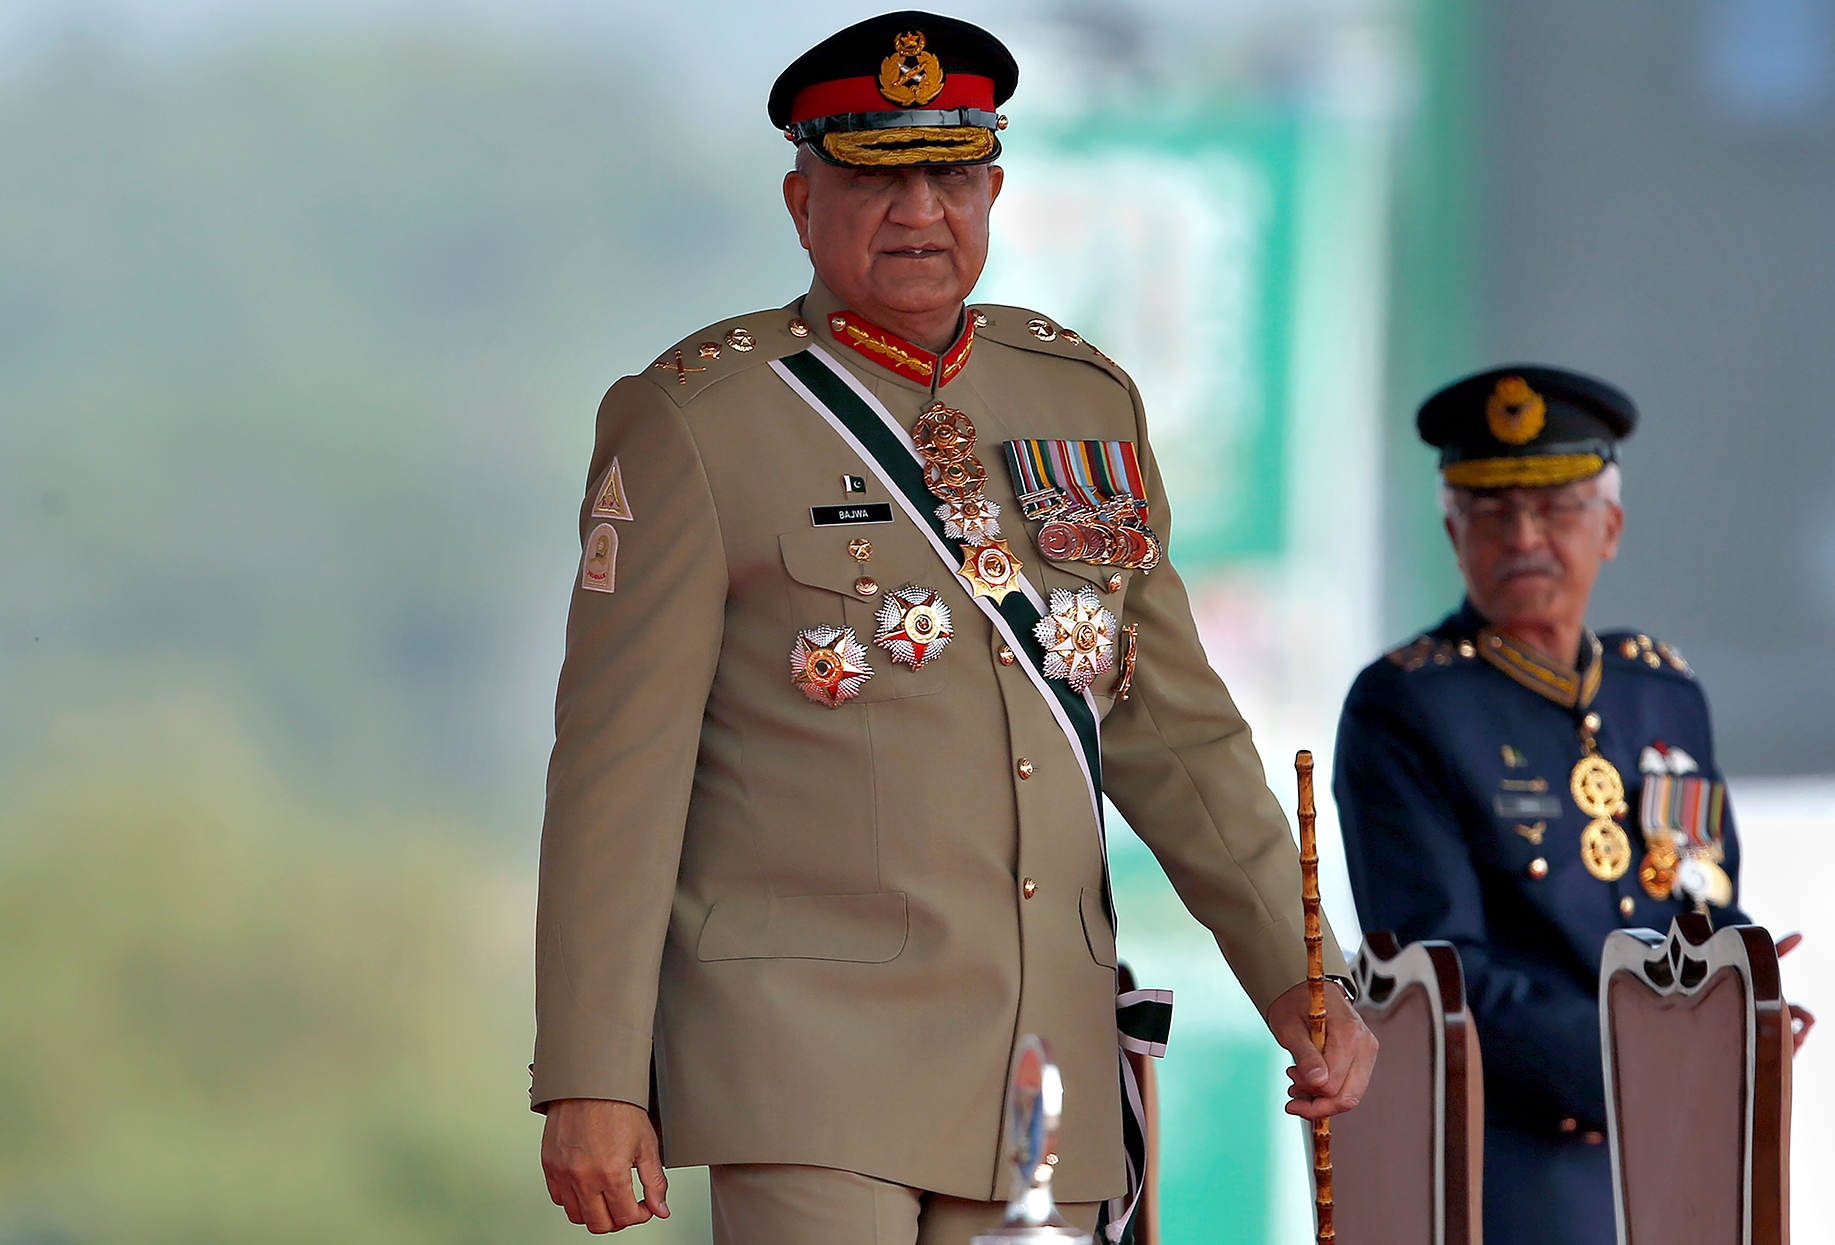 Pakistan's Chief of Army Staff, Qamar Javed Bajwa, attends a military parade in Islamabad, Pakistan on March 23. 